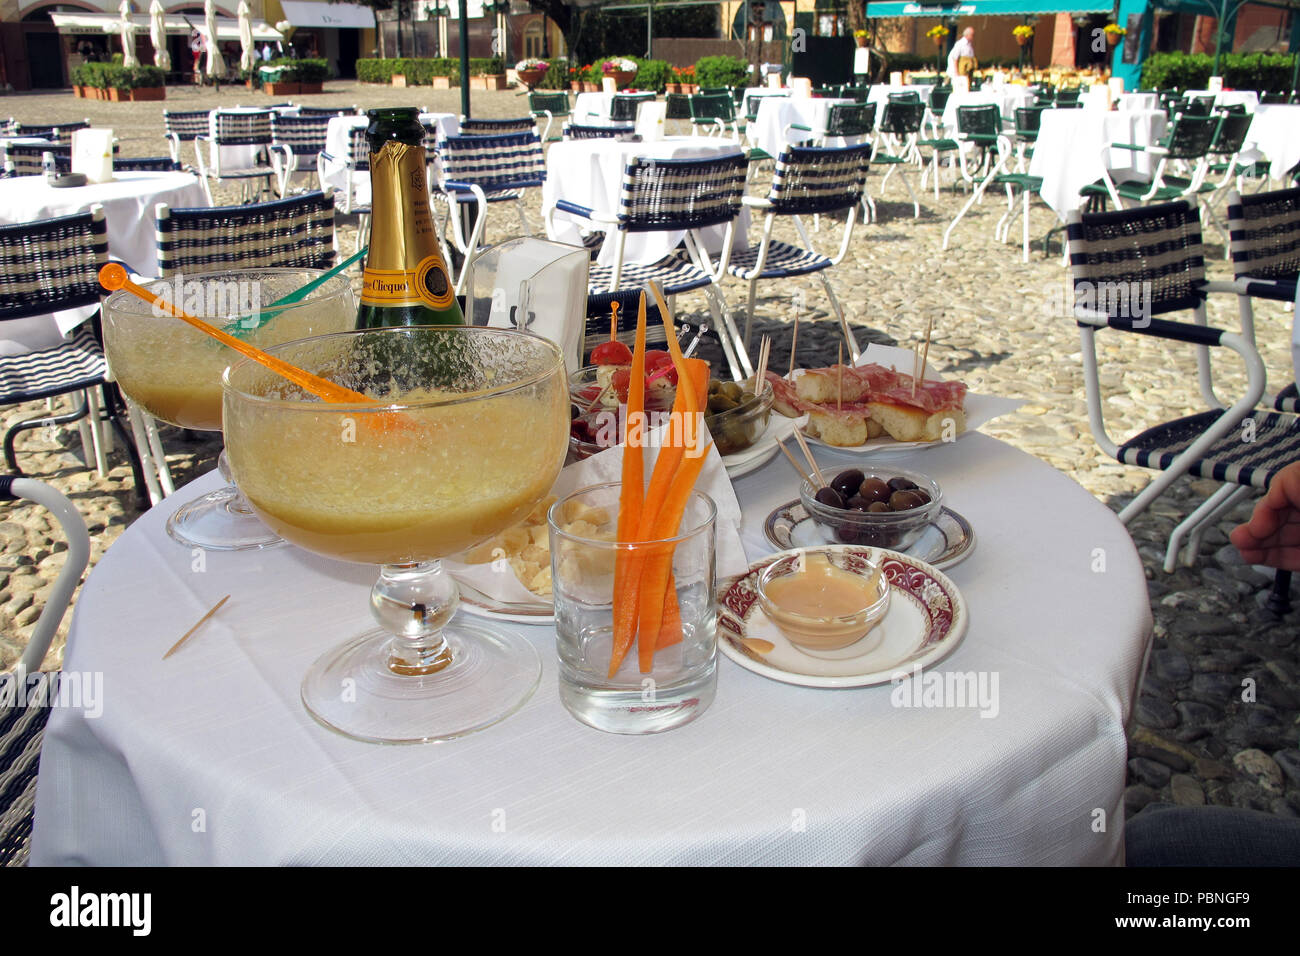 An extraordinary Bellini cocktail on a table in a café by the Piazzetta in Portofino, Italy. Stock Photo